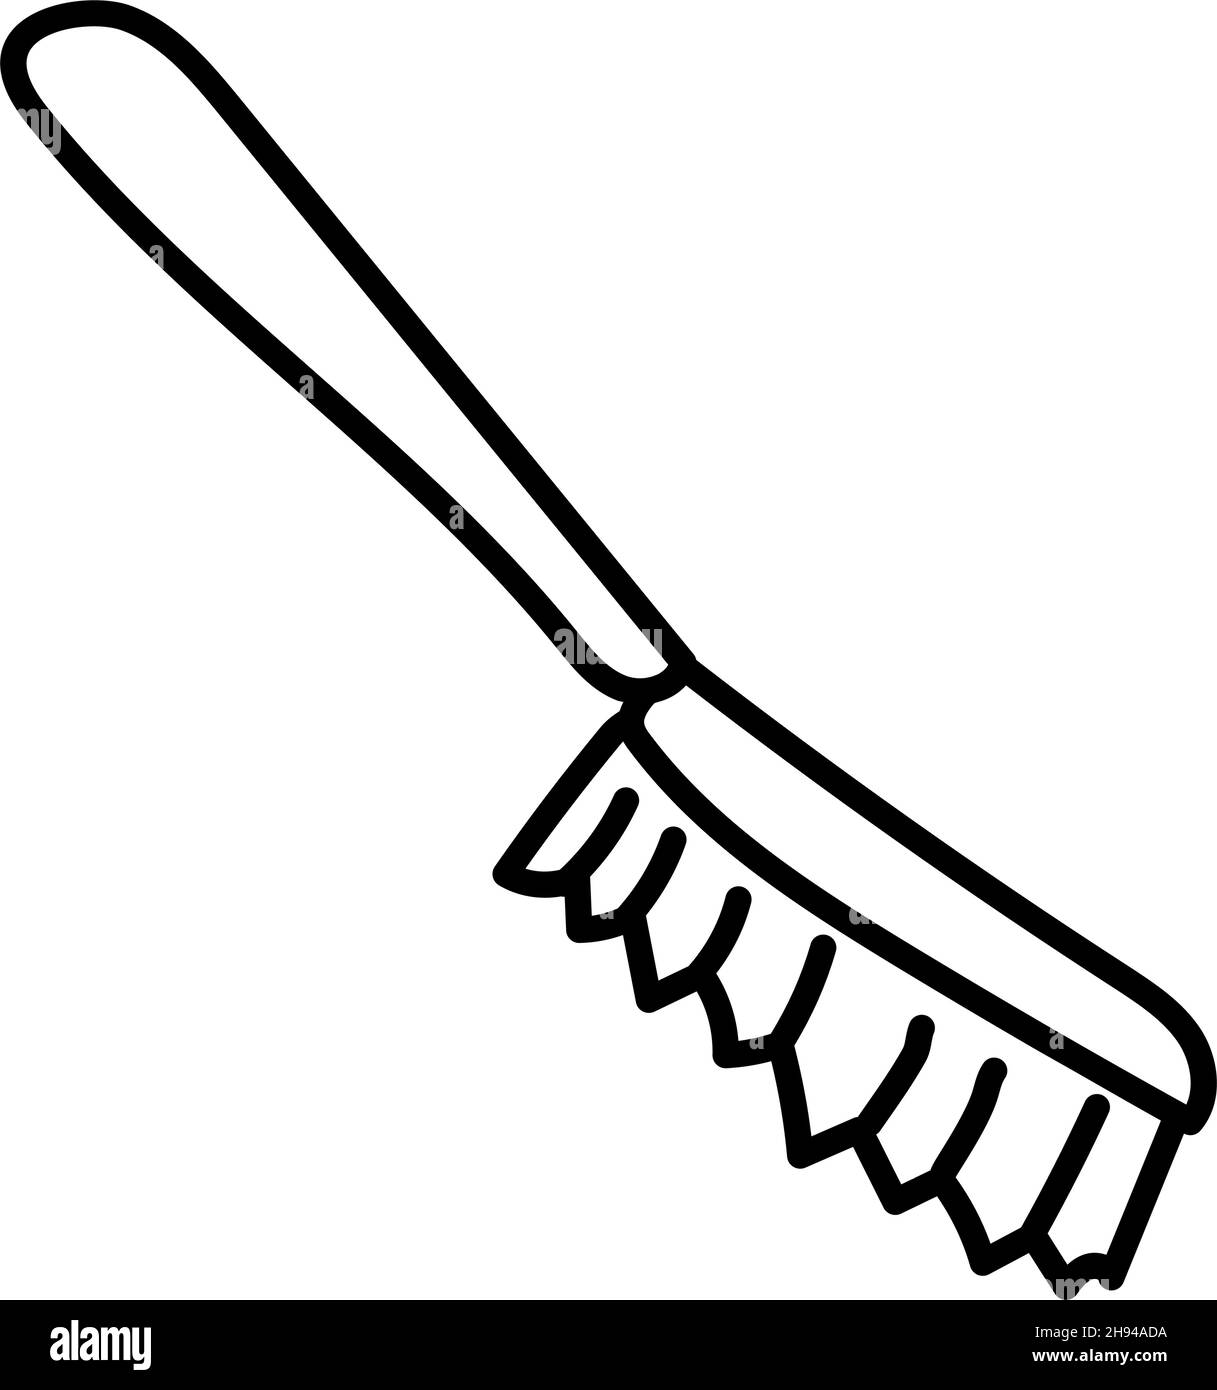 cleaning brush. vector hand drawn doodle style element Stock Vector